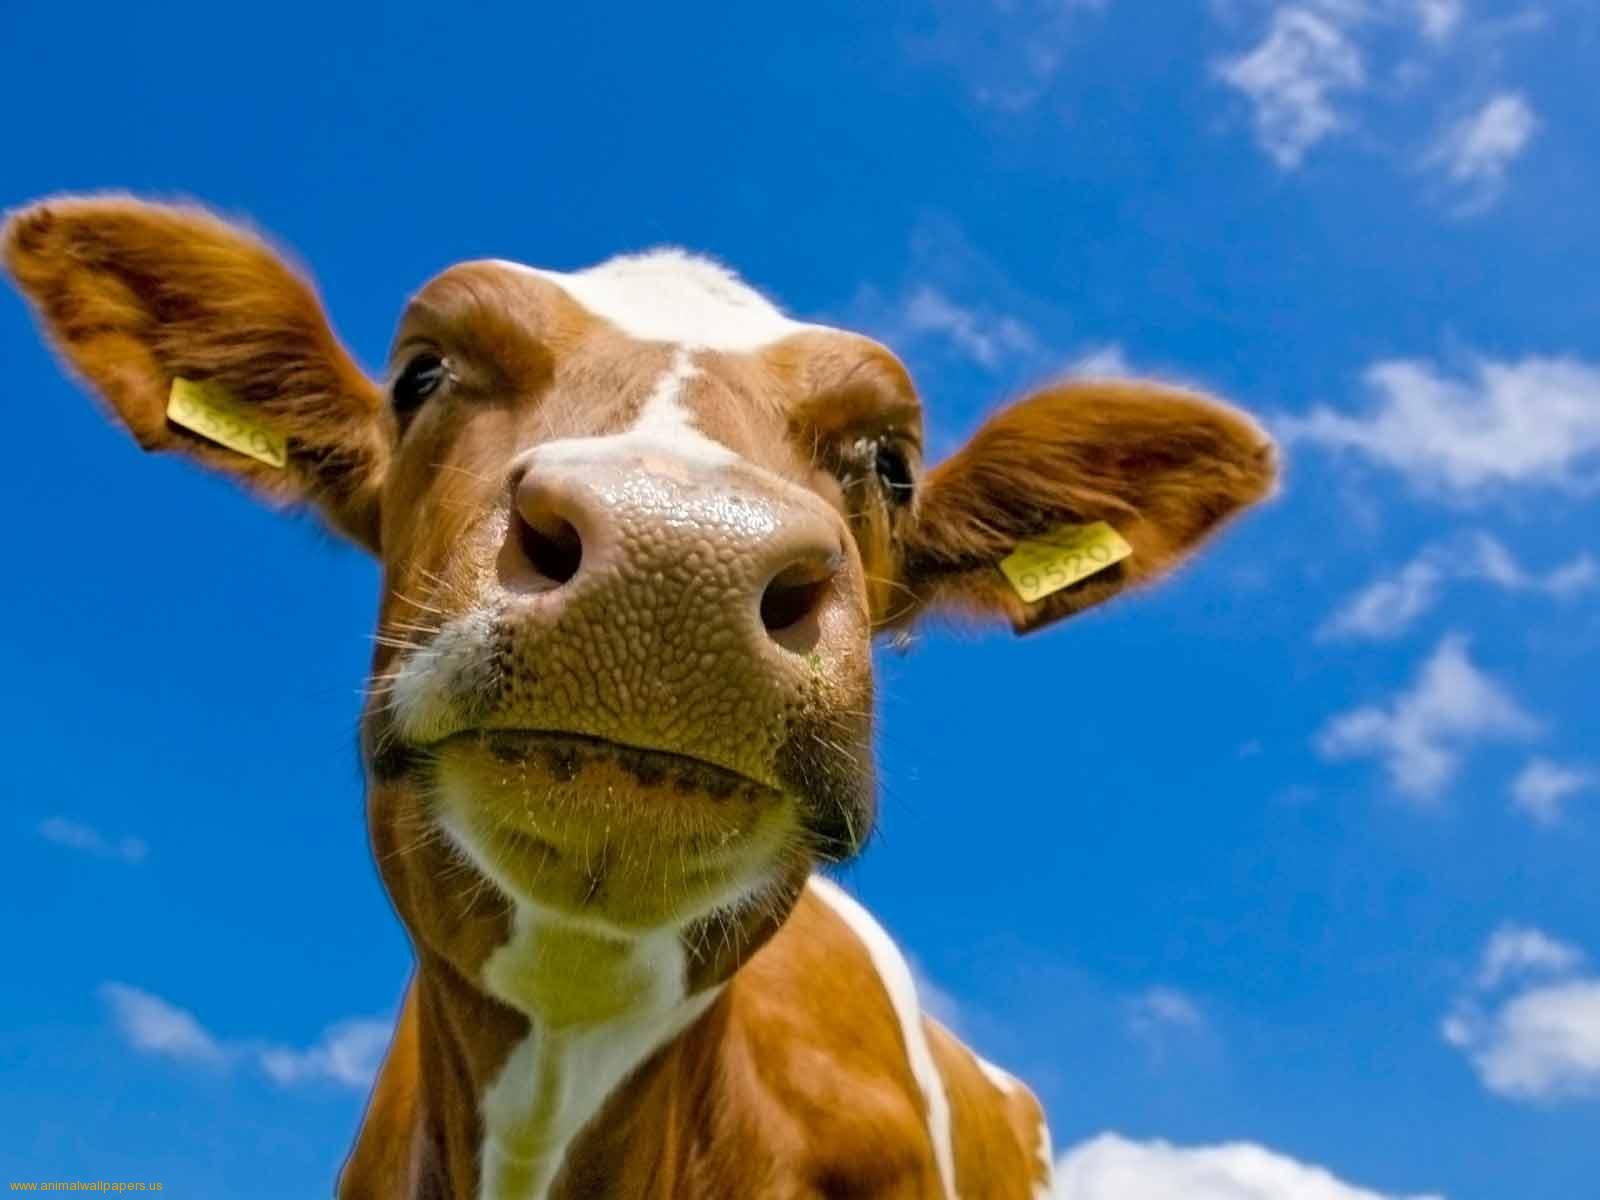 Cow HD Wallpaper Image For Full